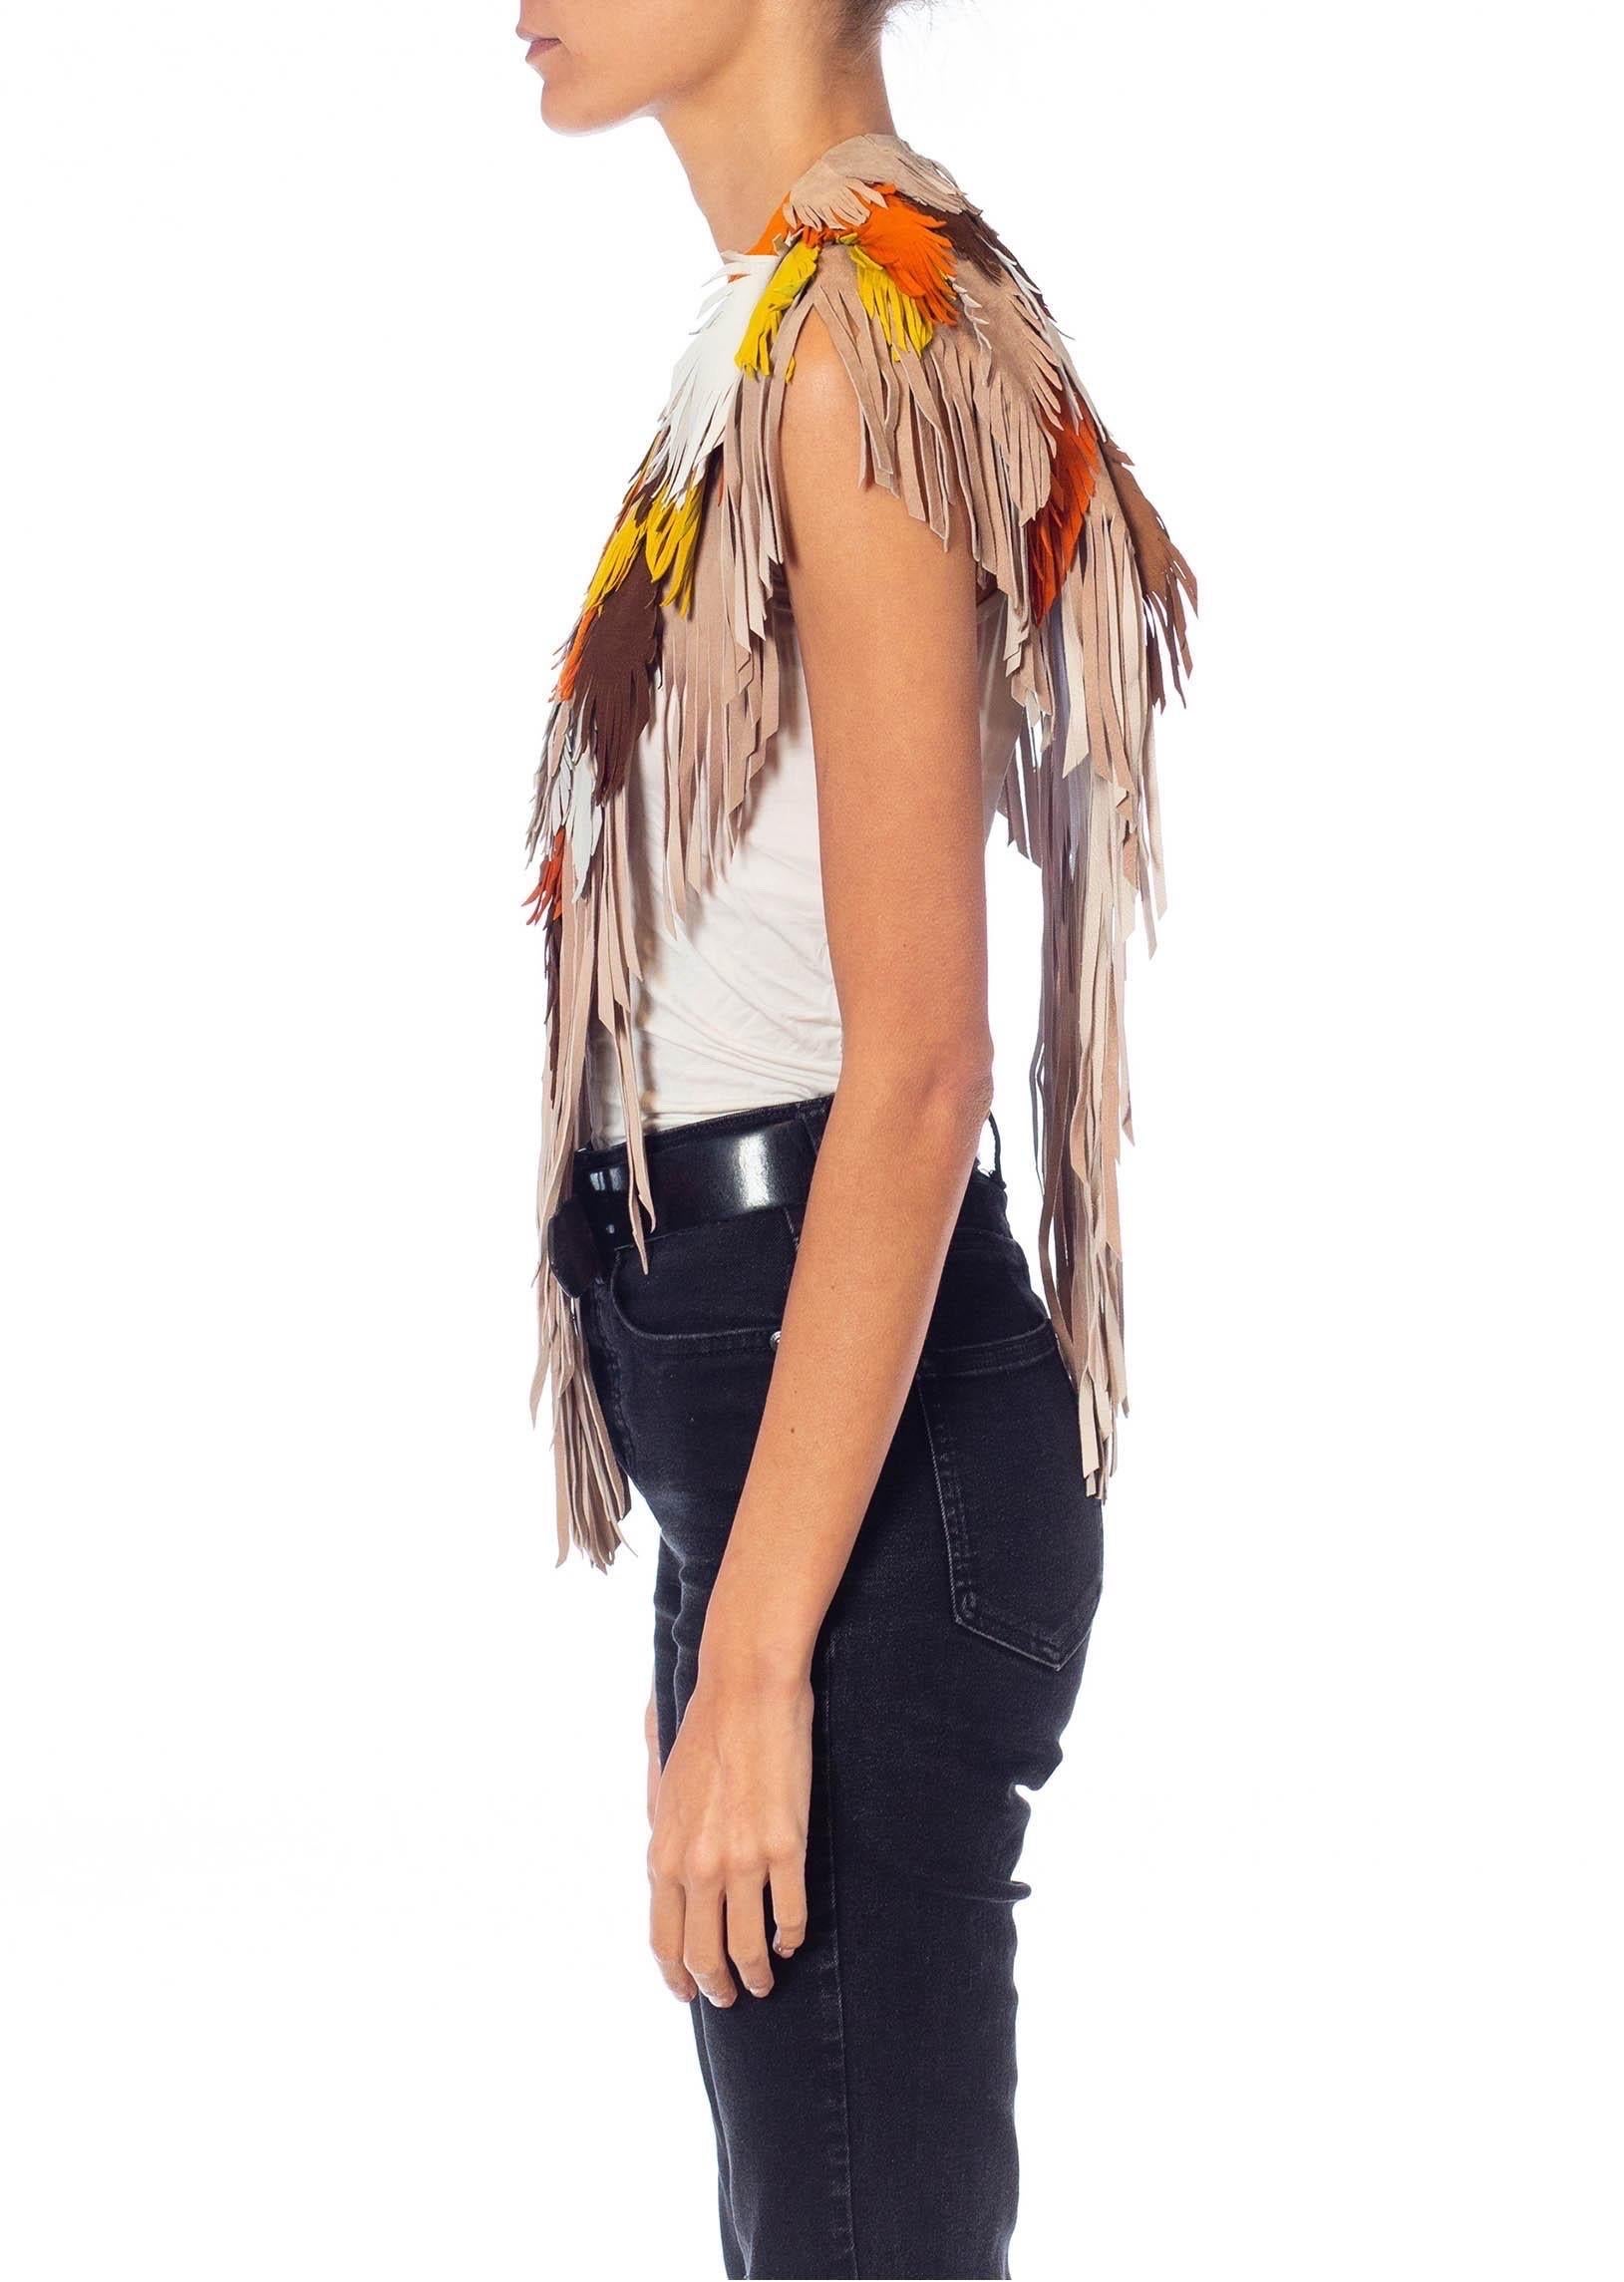 MORPHEW COLLECTION Phoenix Sunset Suede Fringe Feather Leather Cape In Excellent Condition For Sale In New York, NY